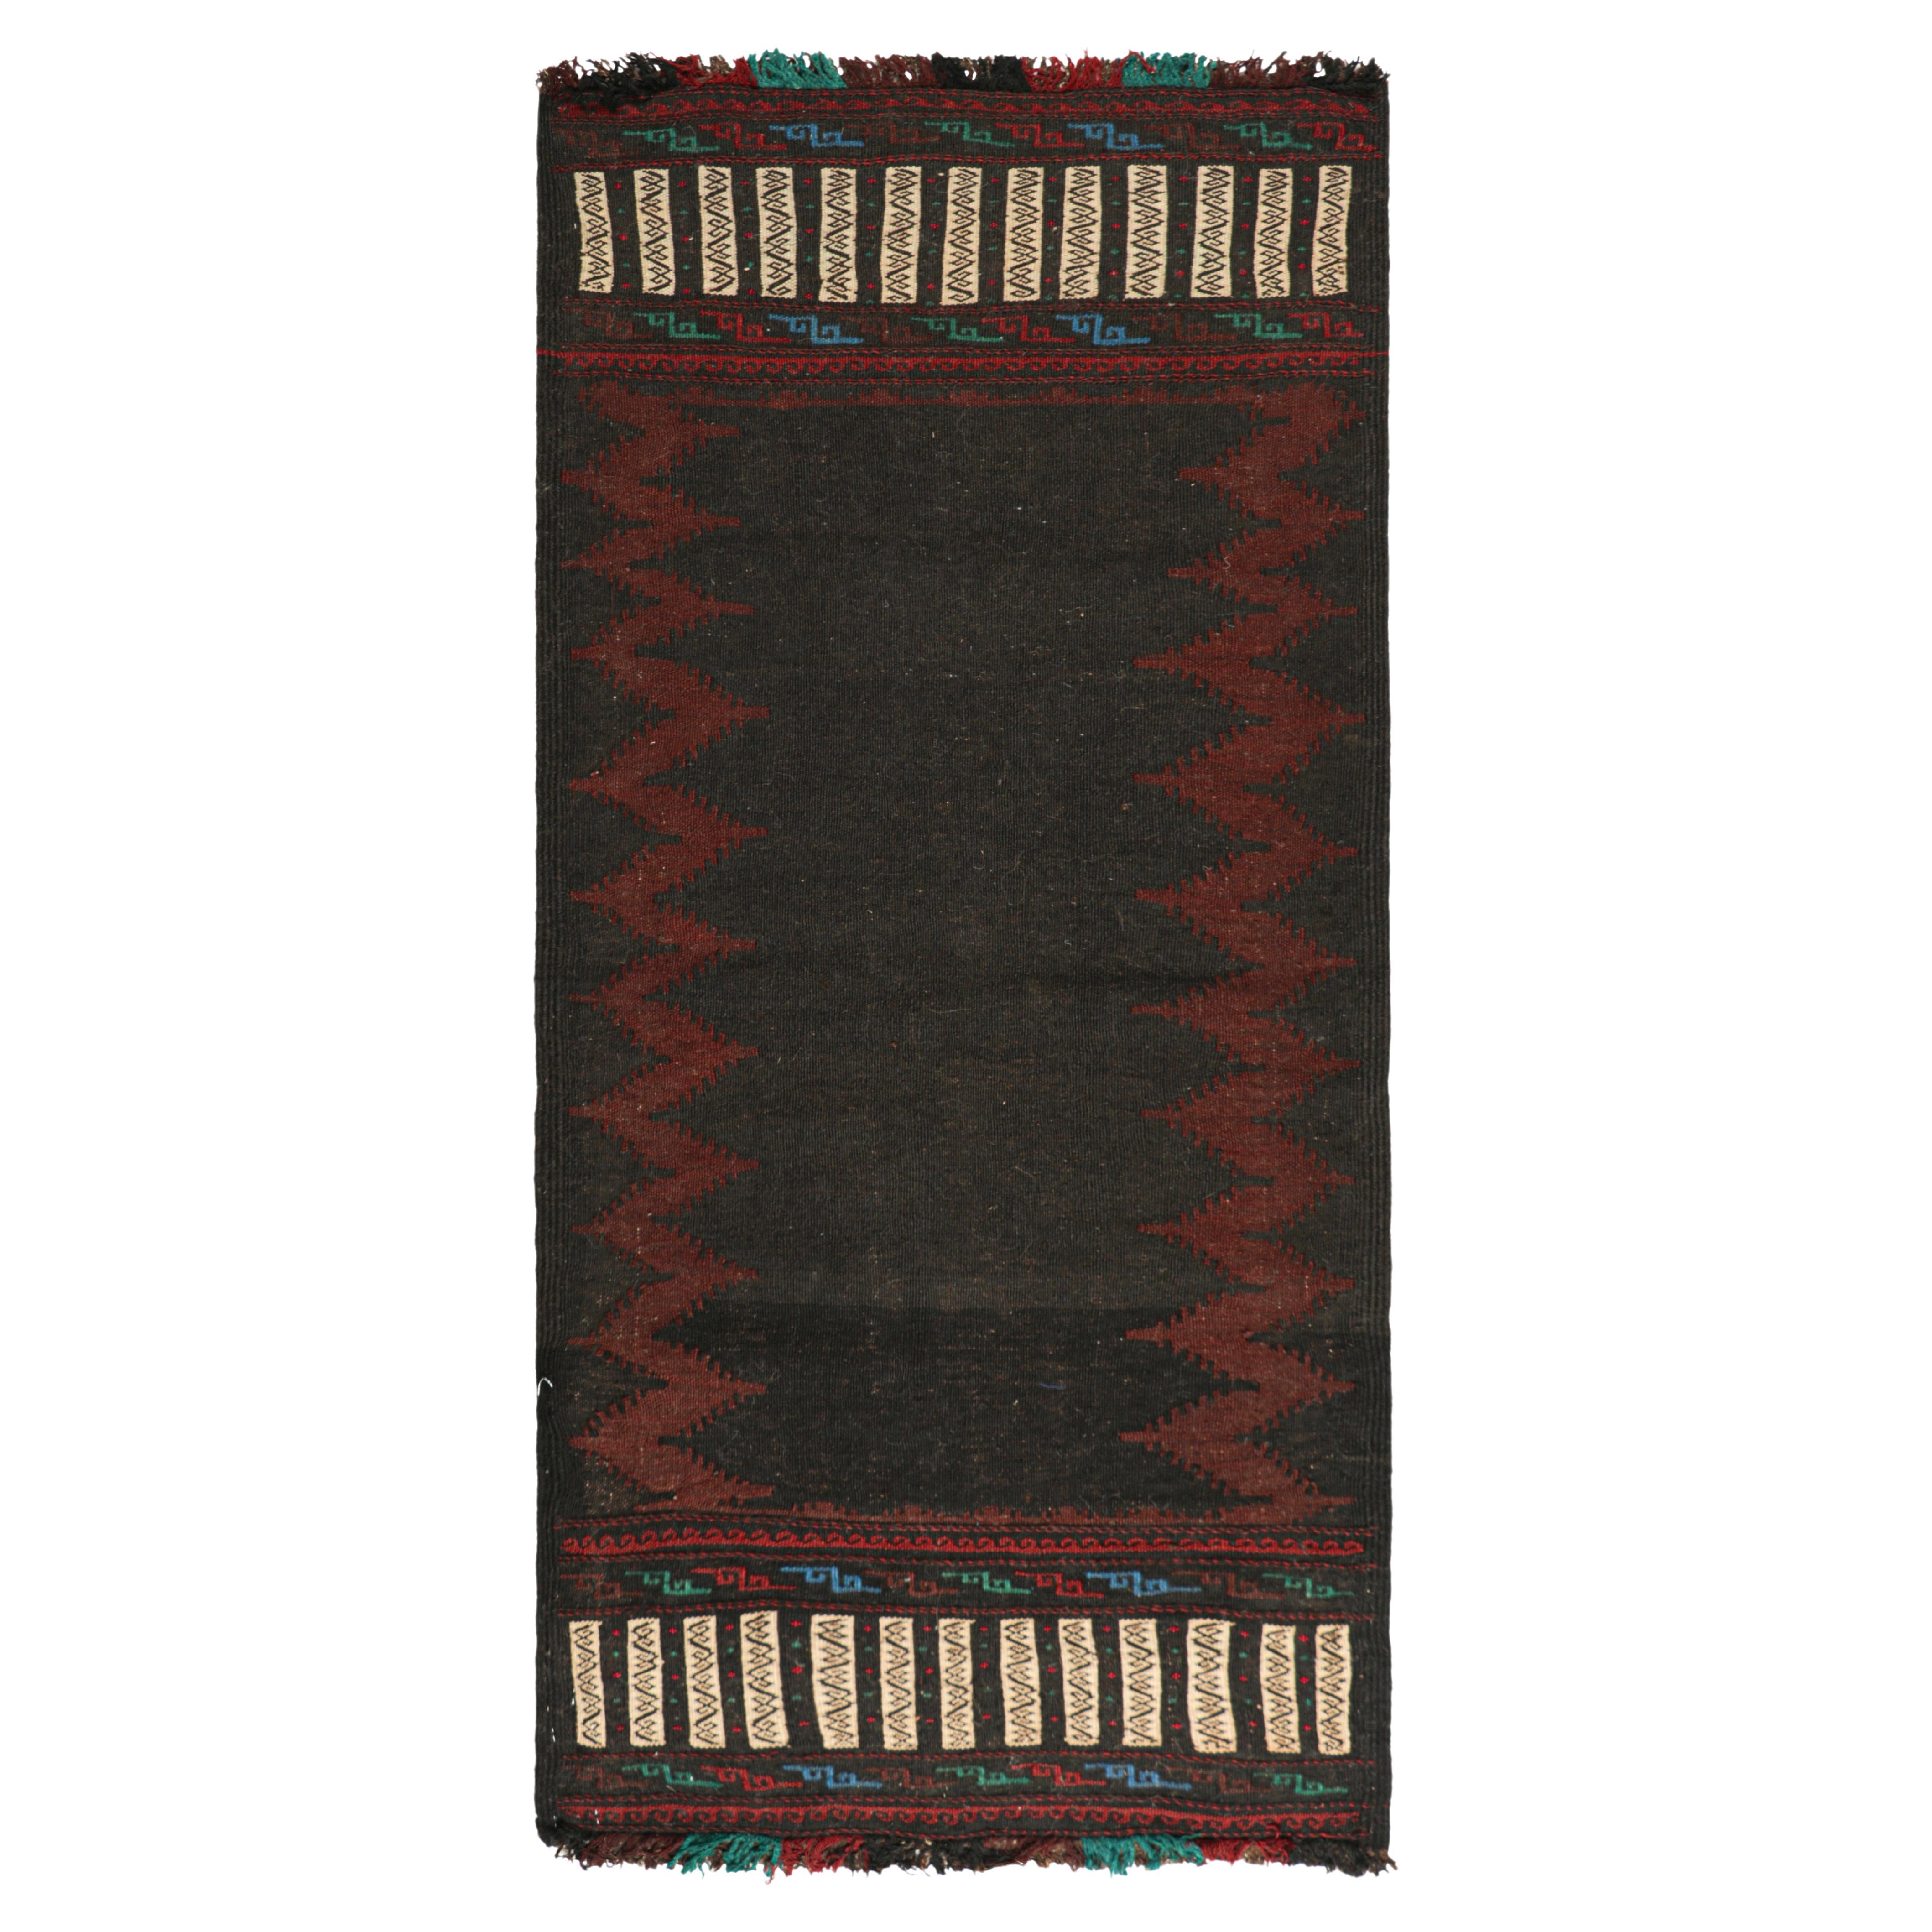 Vintage Afghan Kilim in Chocolate Brown with Red Chevrons, from Rug & Kilim For Sale